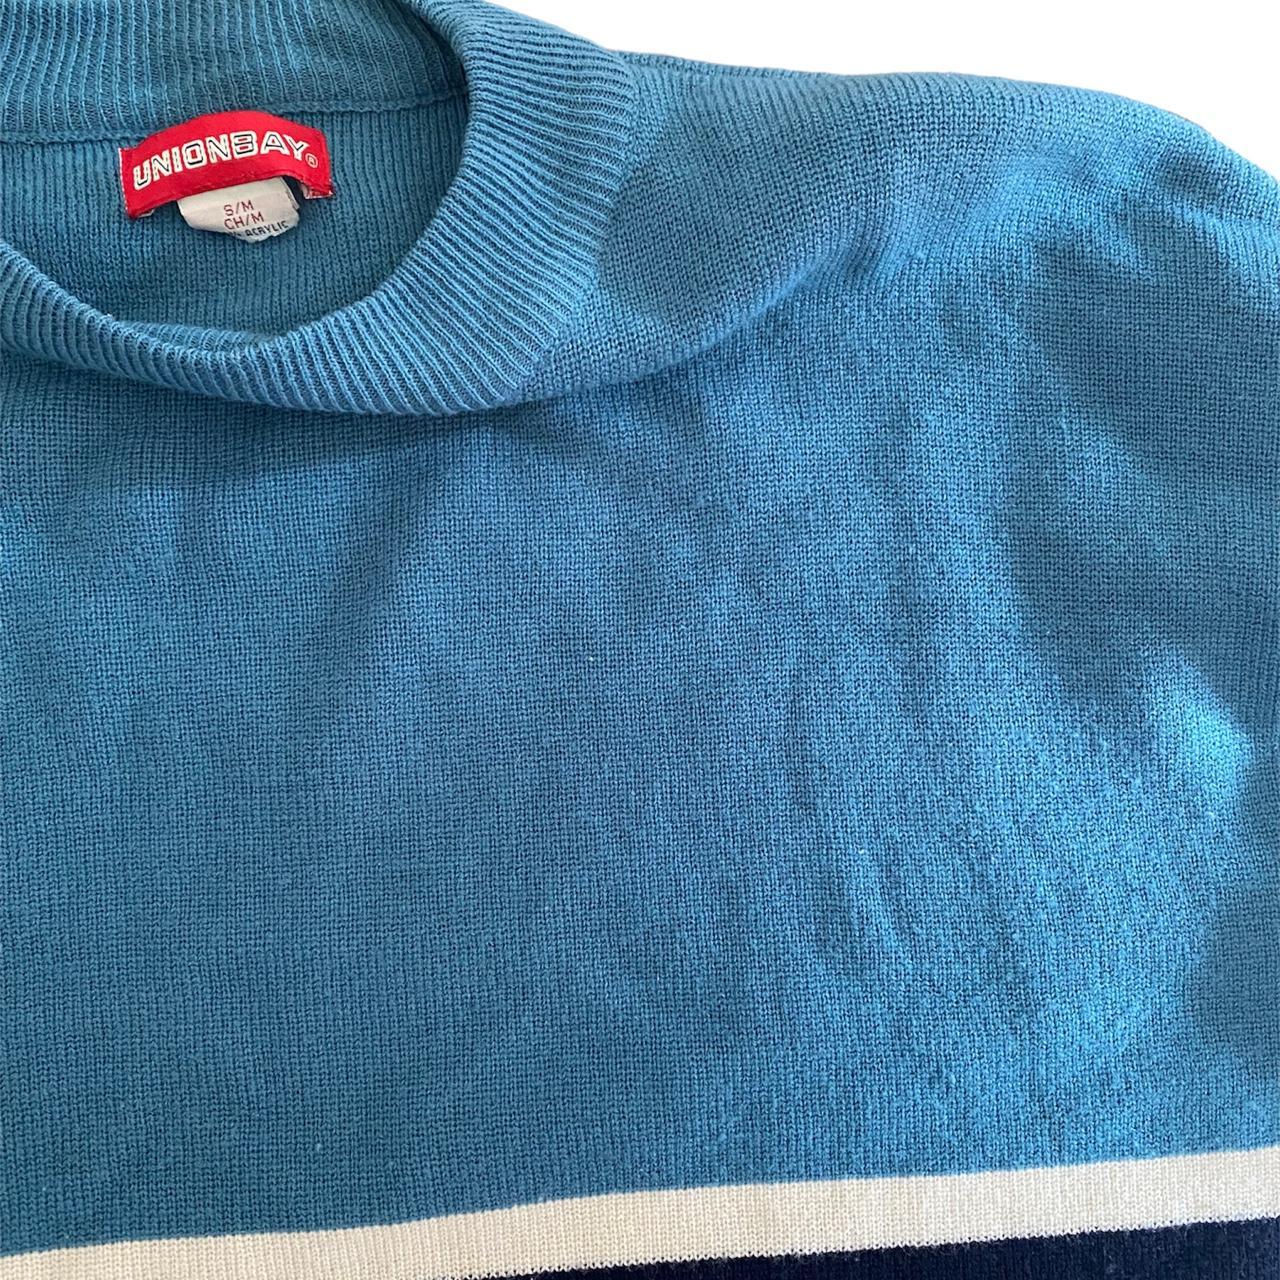 Union Bay Men's Blue and White Jumper (2)